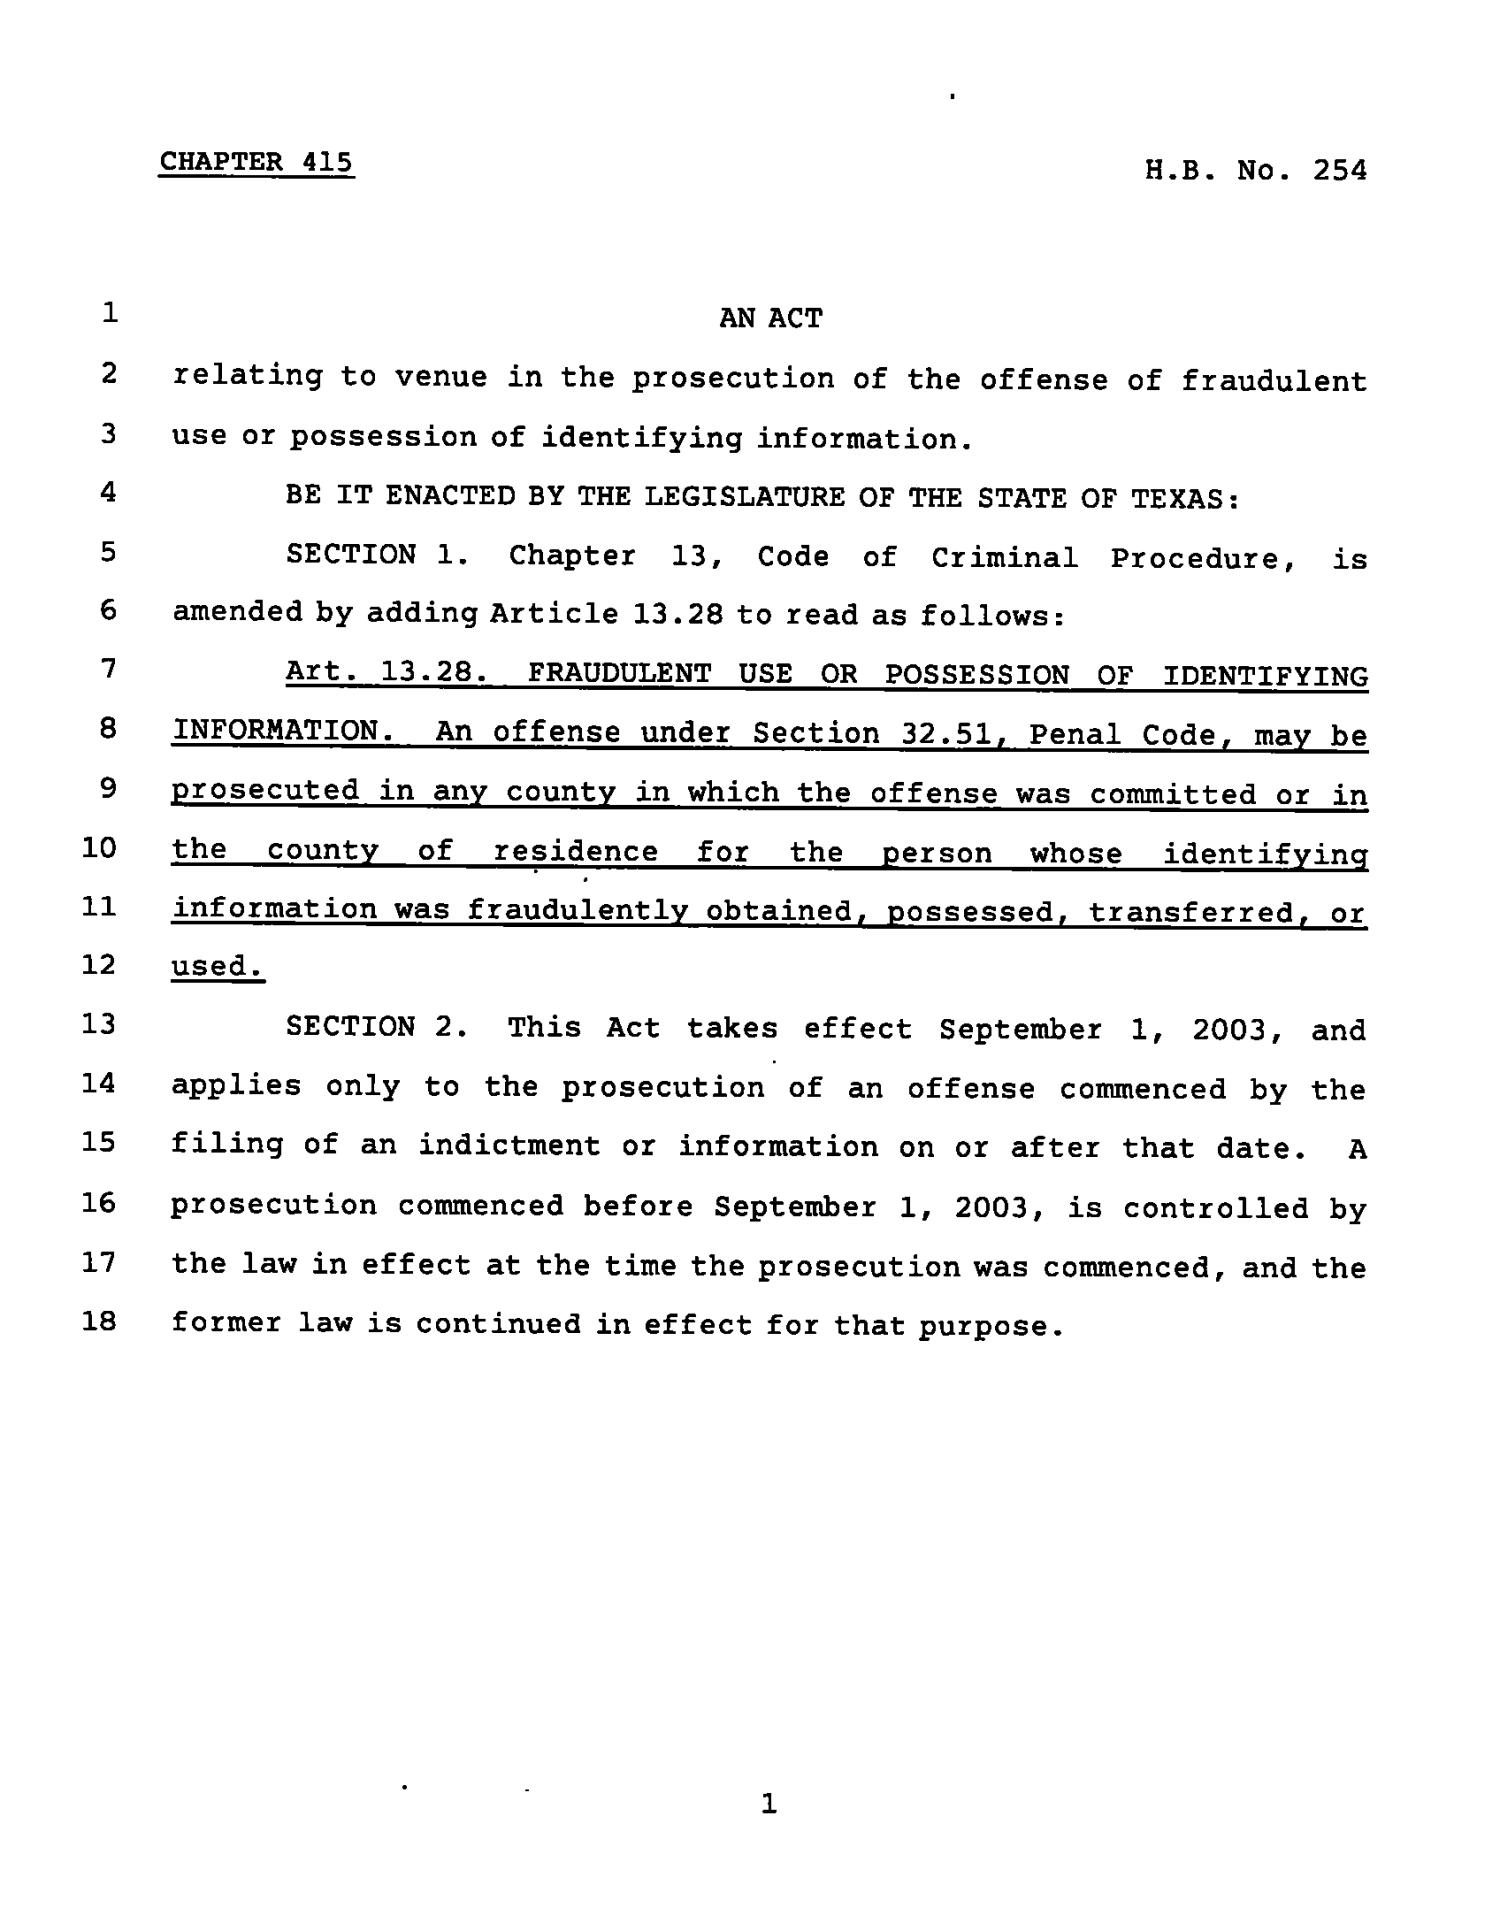 78th Texas Legislature, Regular Session, House Bill 254, Chapter 415
                                                
                                                    [Sequence #]: 1 of 2
                                                